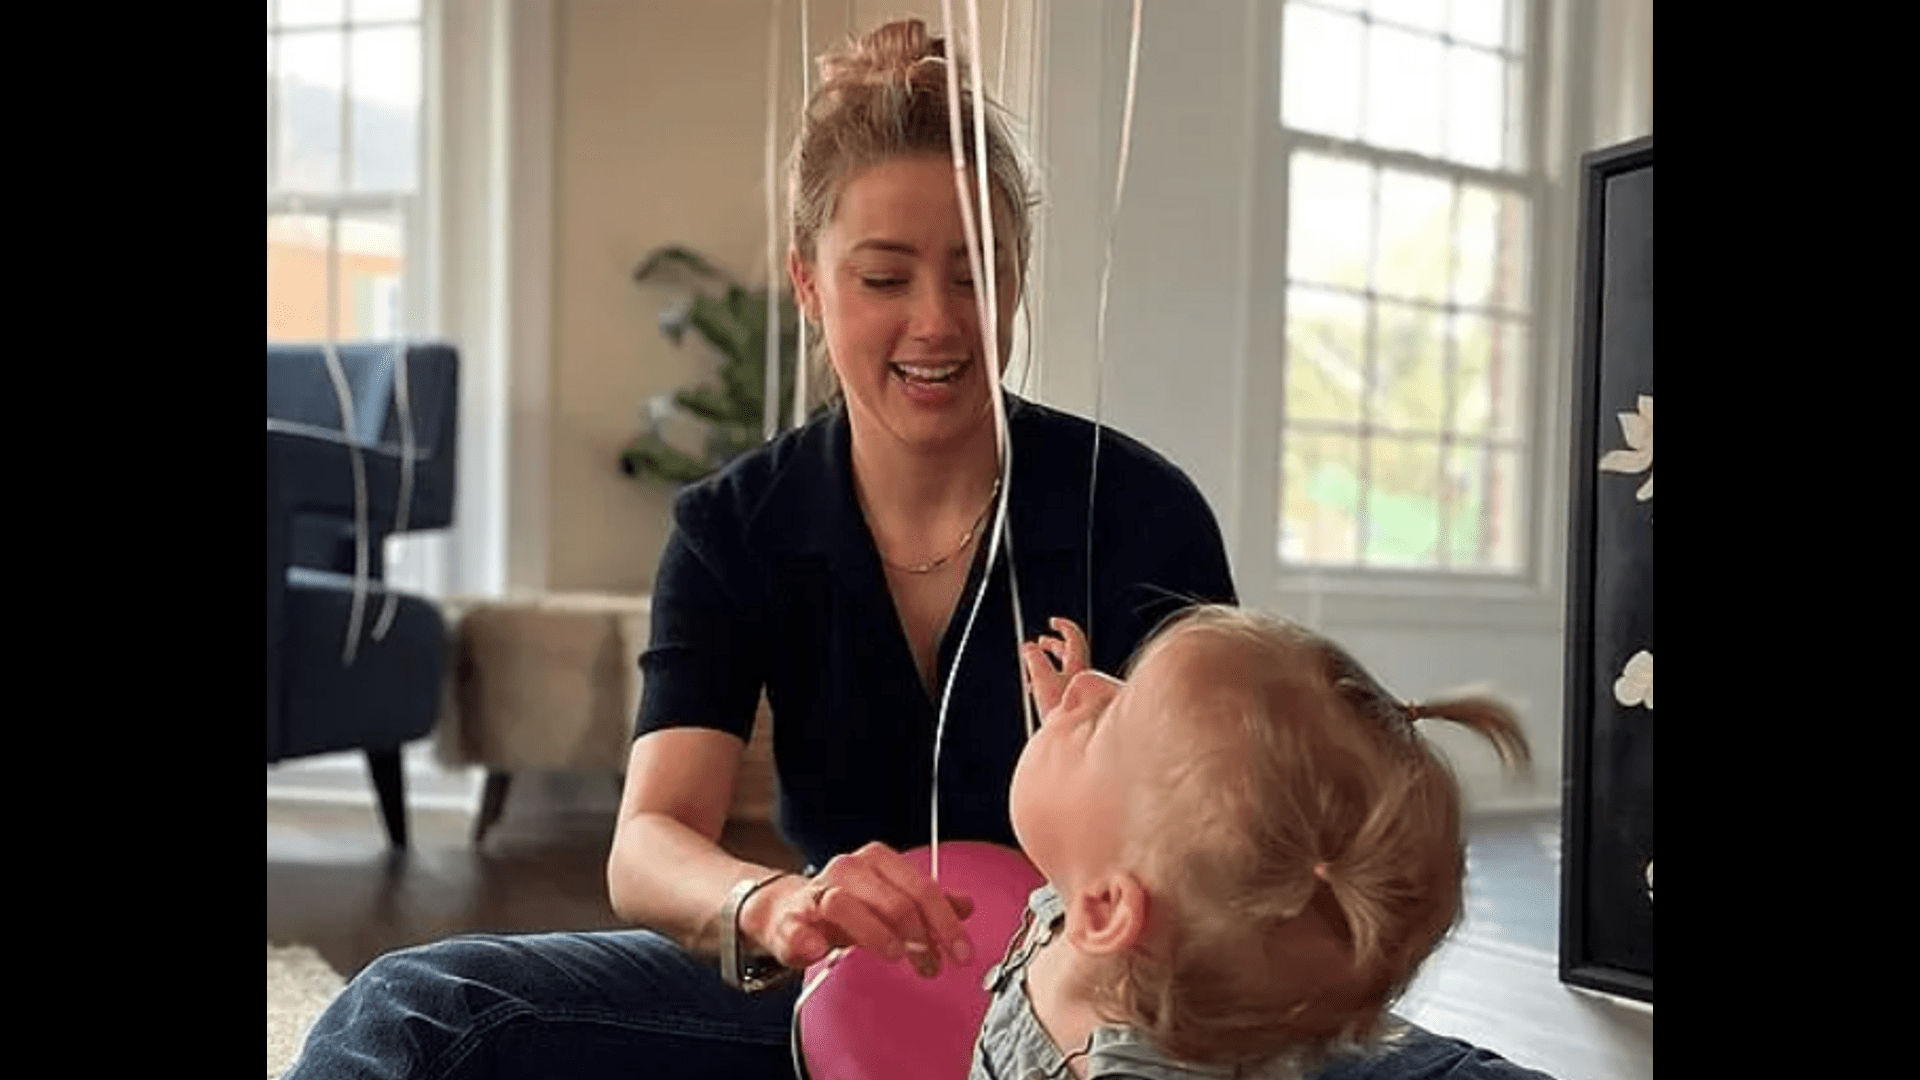 amber-heard-posted-a-very-touching-picture-with-her-daughter-una-in-honor-of-her-birthday